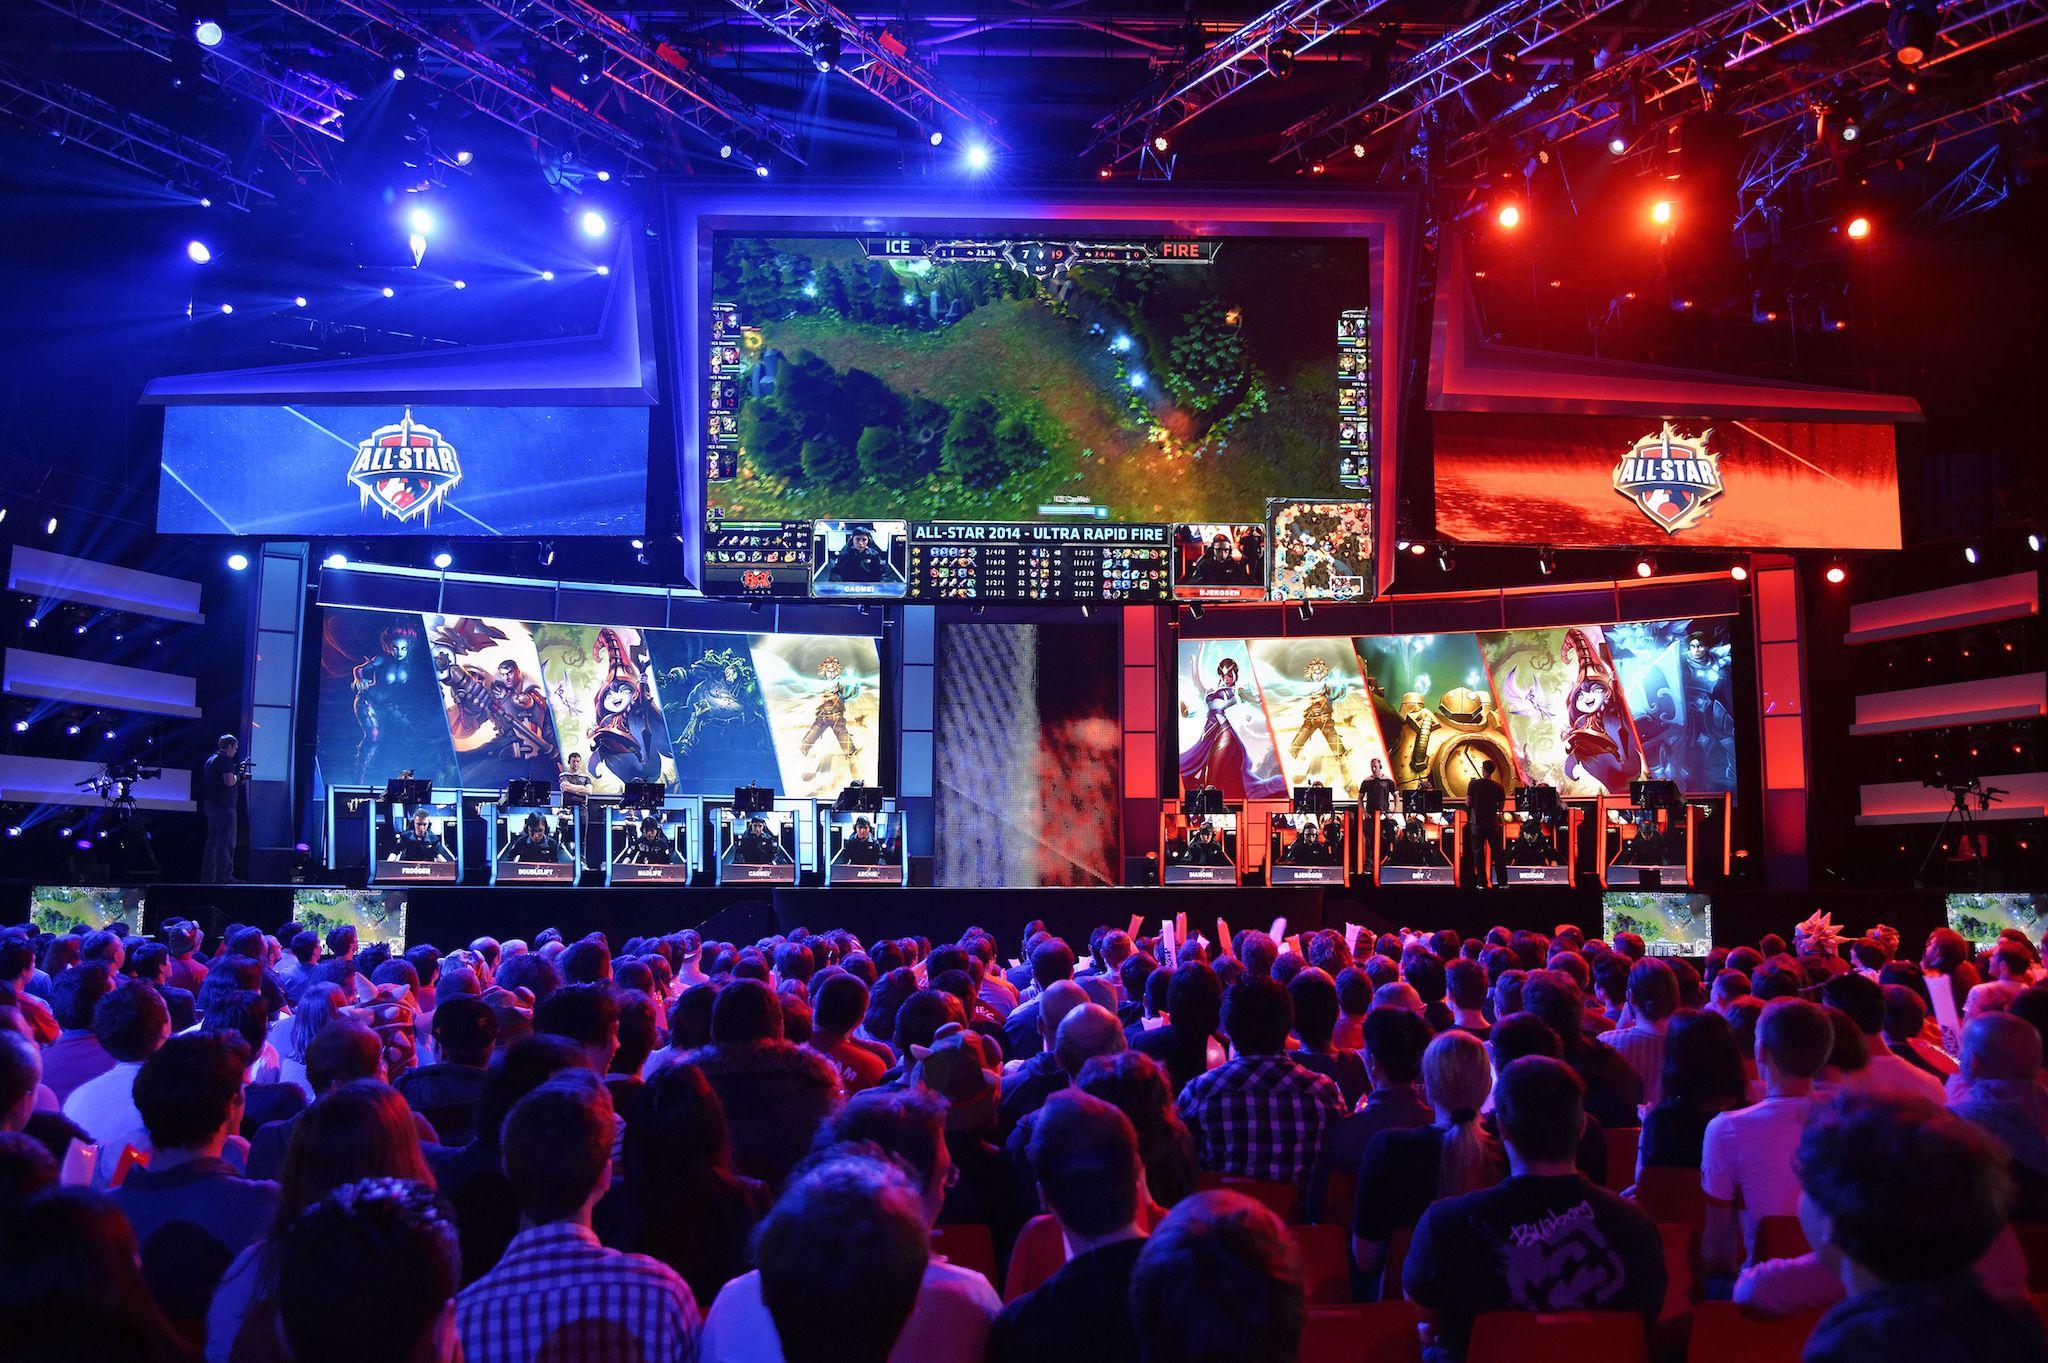 Visitors watch international teams play during the tournament of the computer game "League of Legends" on May 8, 2014 in Paris